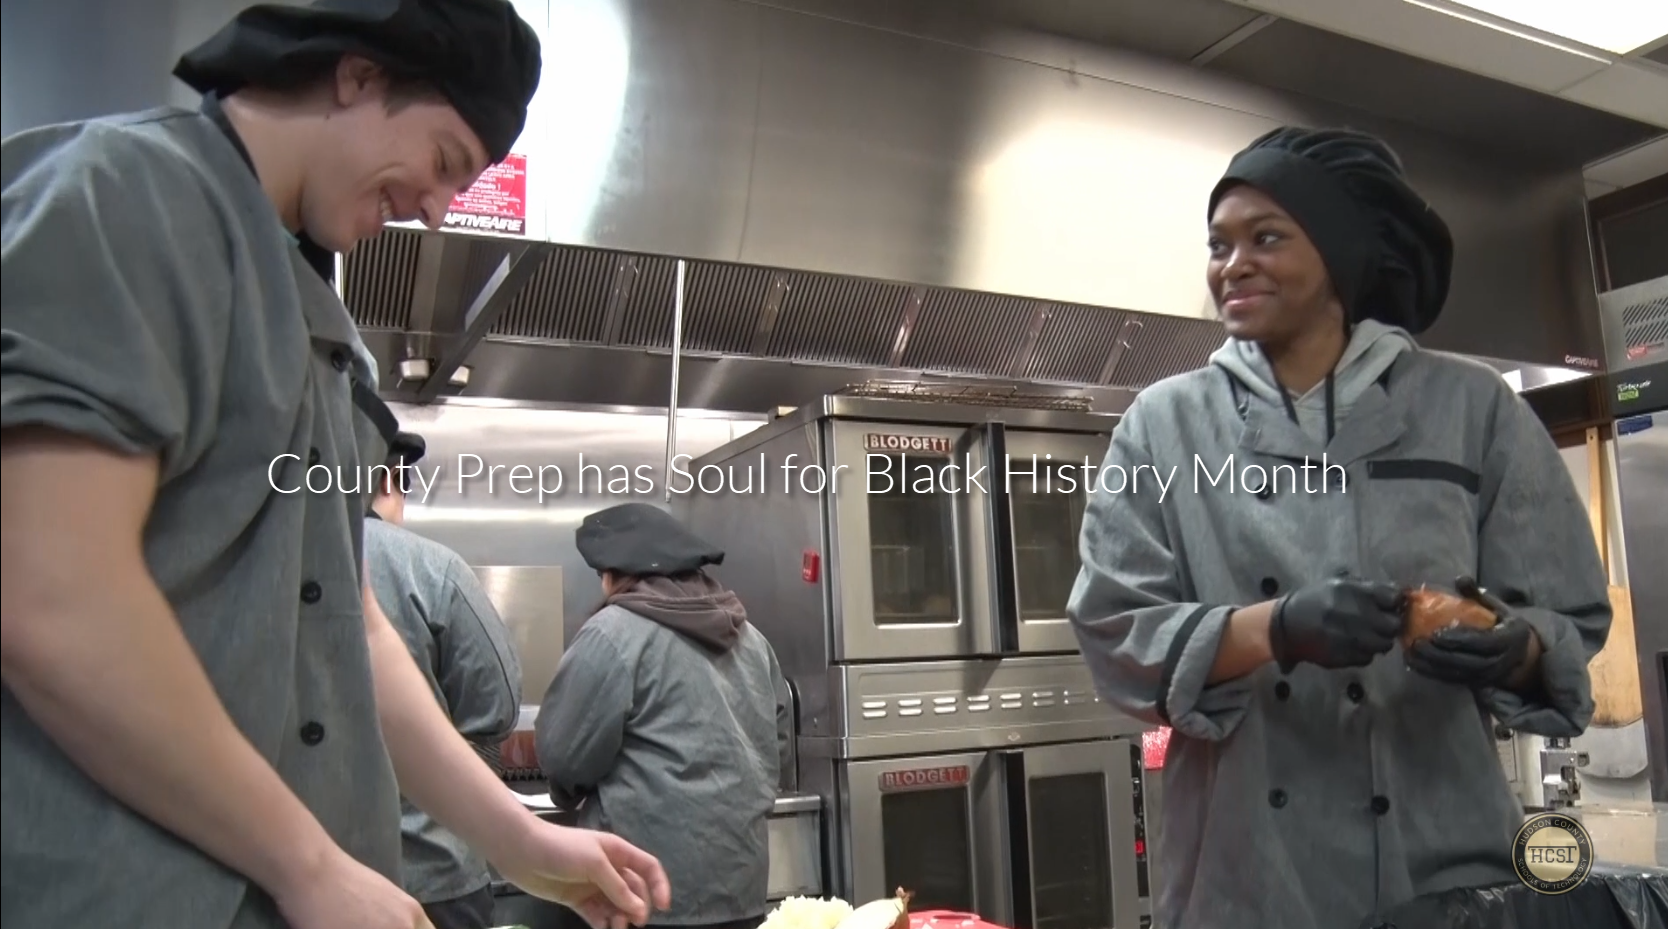 County Prep has Soul for Black History Month